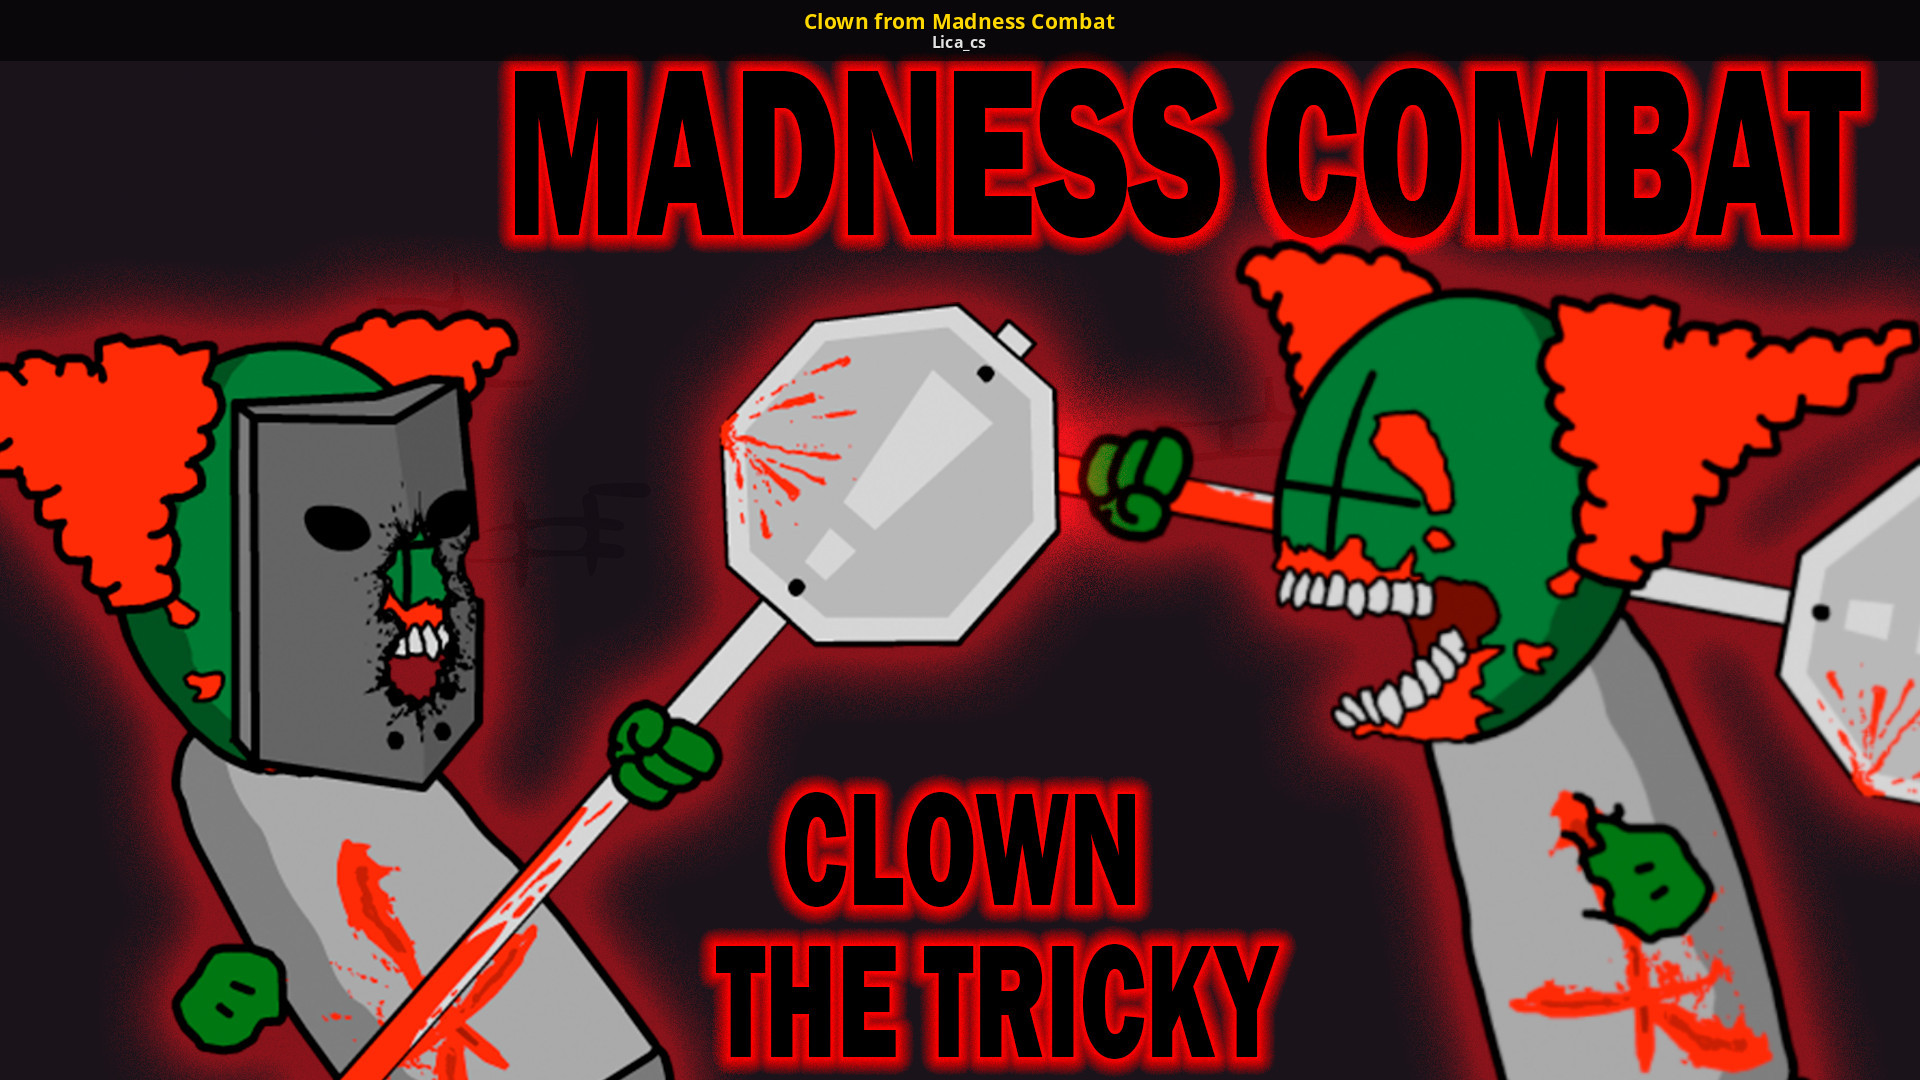 Game [Madness Combat] Tricky the Clown